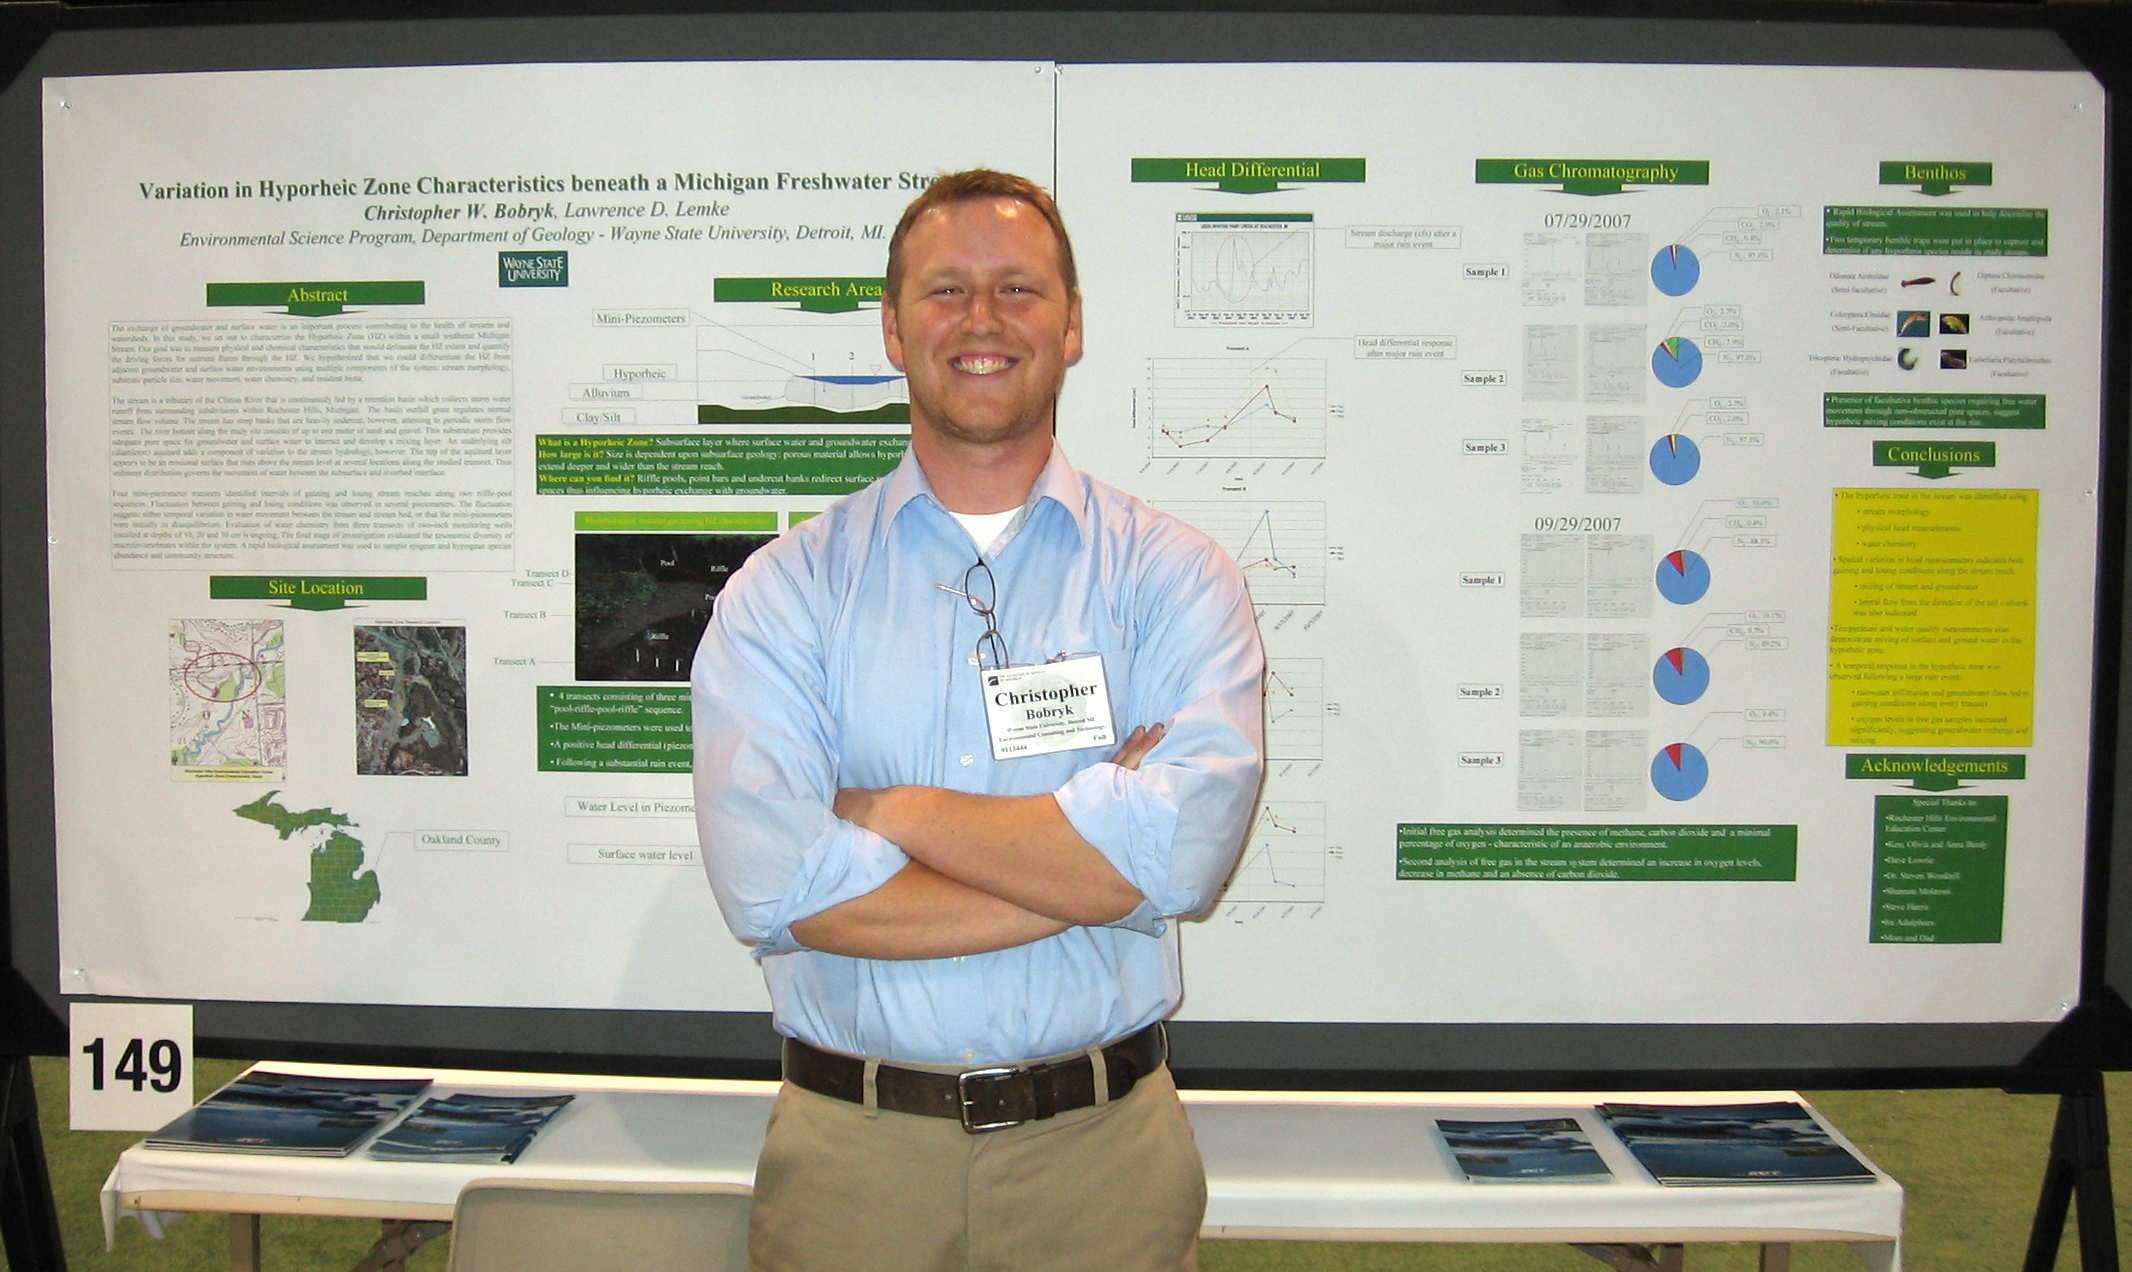 Chris Bobryk in front of presentation poster.